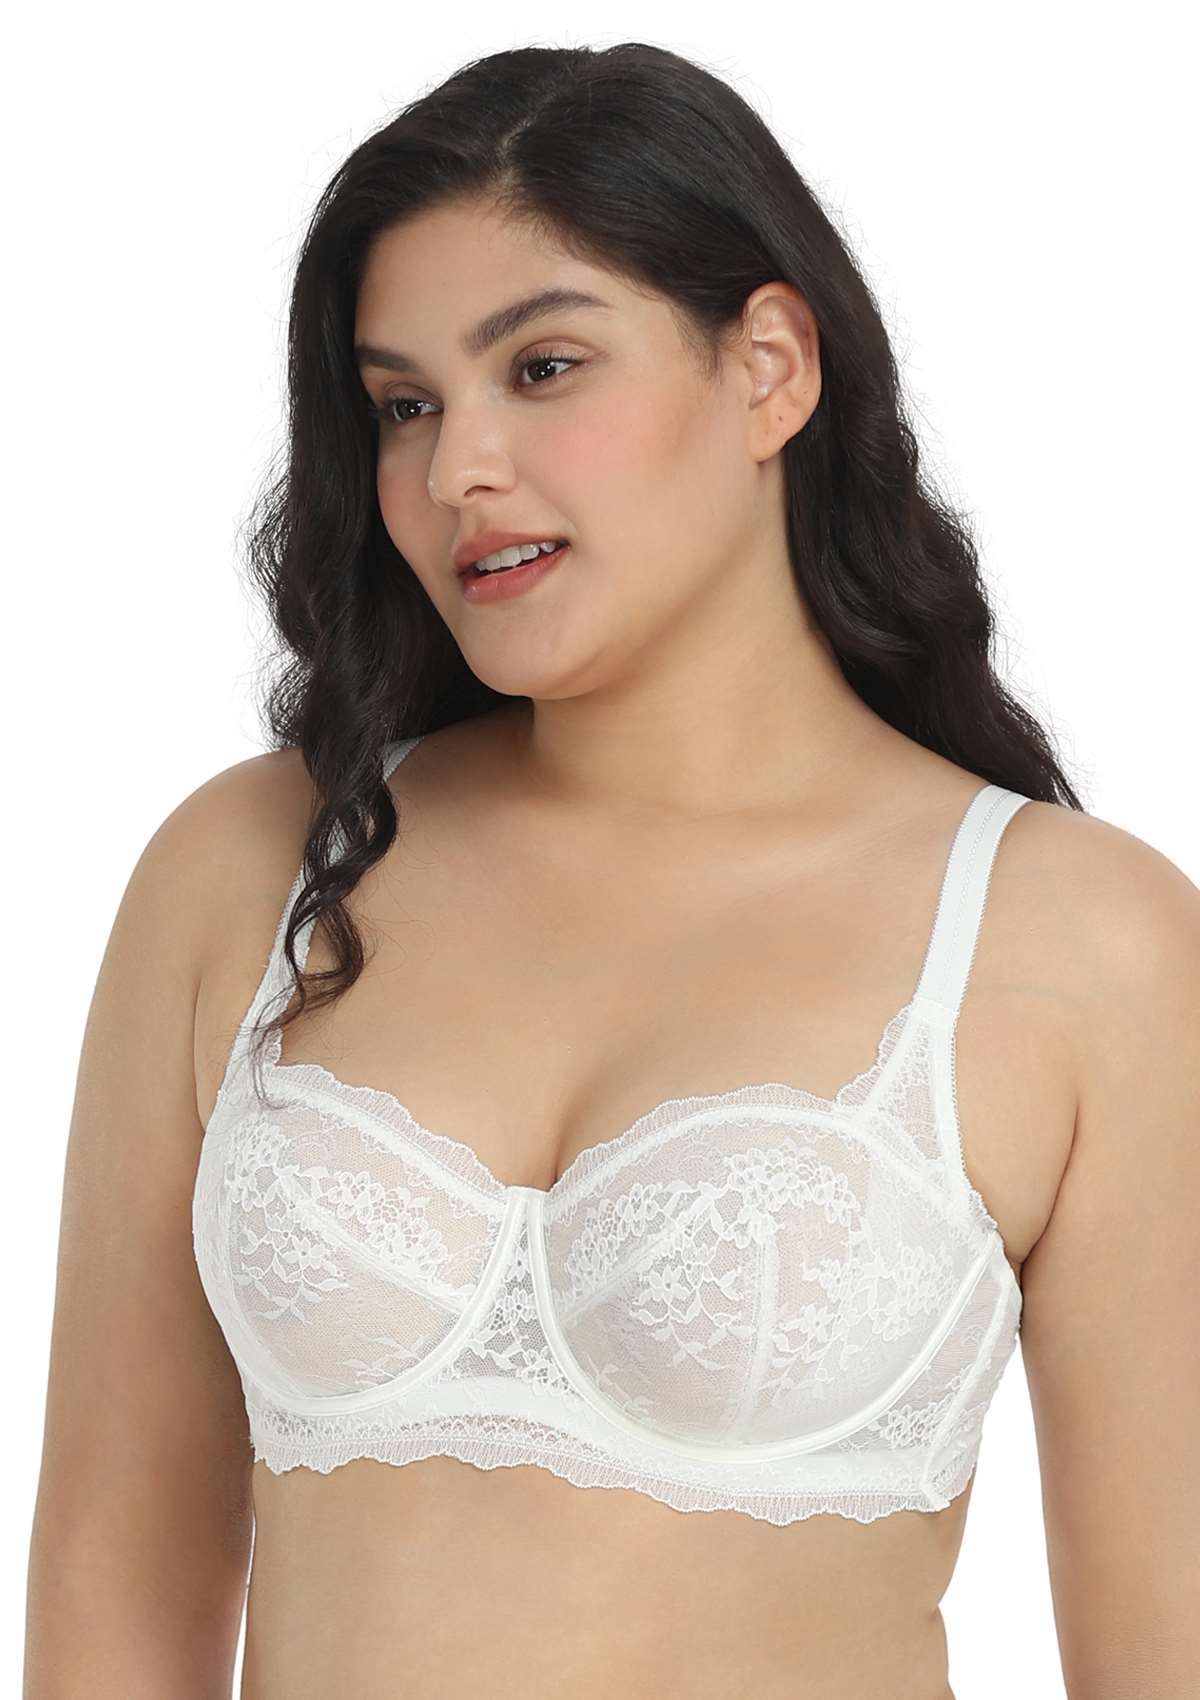 HSIA I Do Floral Lace Bridal Balconette Beautiful Bra For Special Day - White / 34 / DDD/F